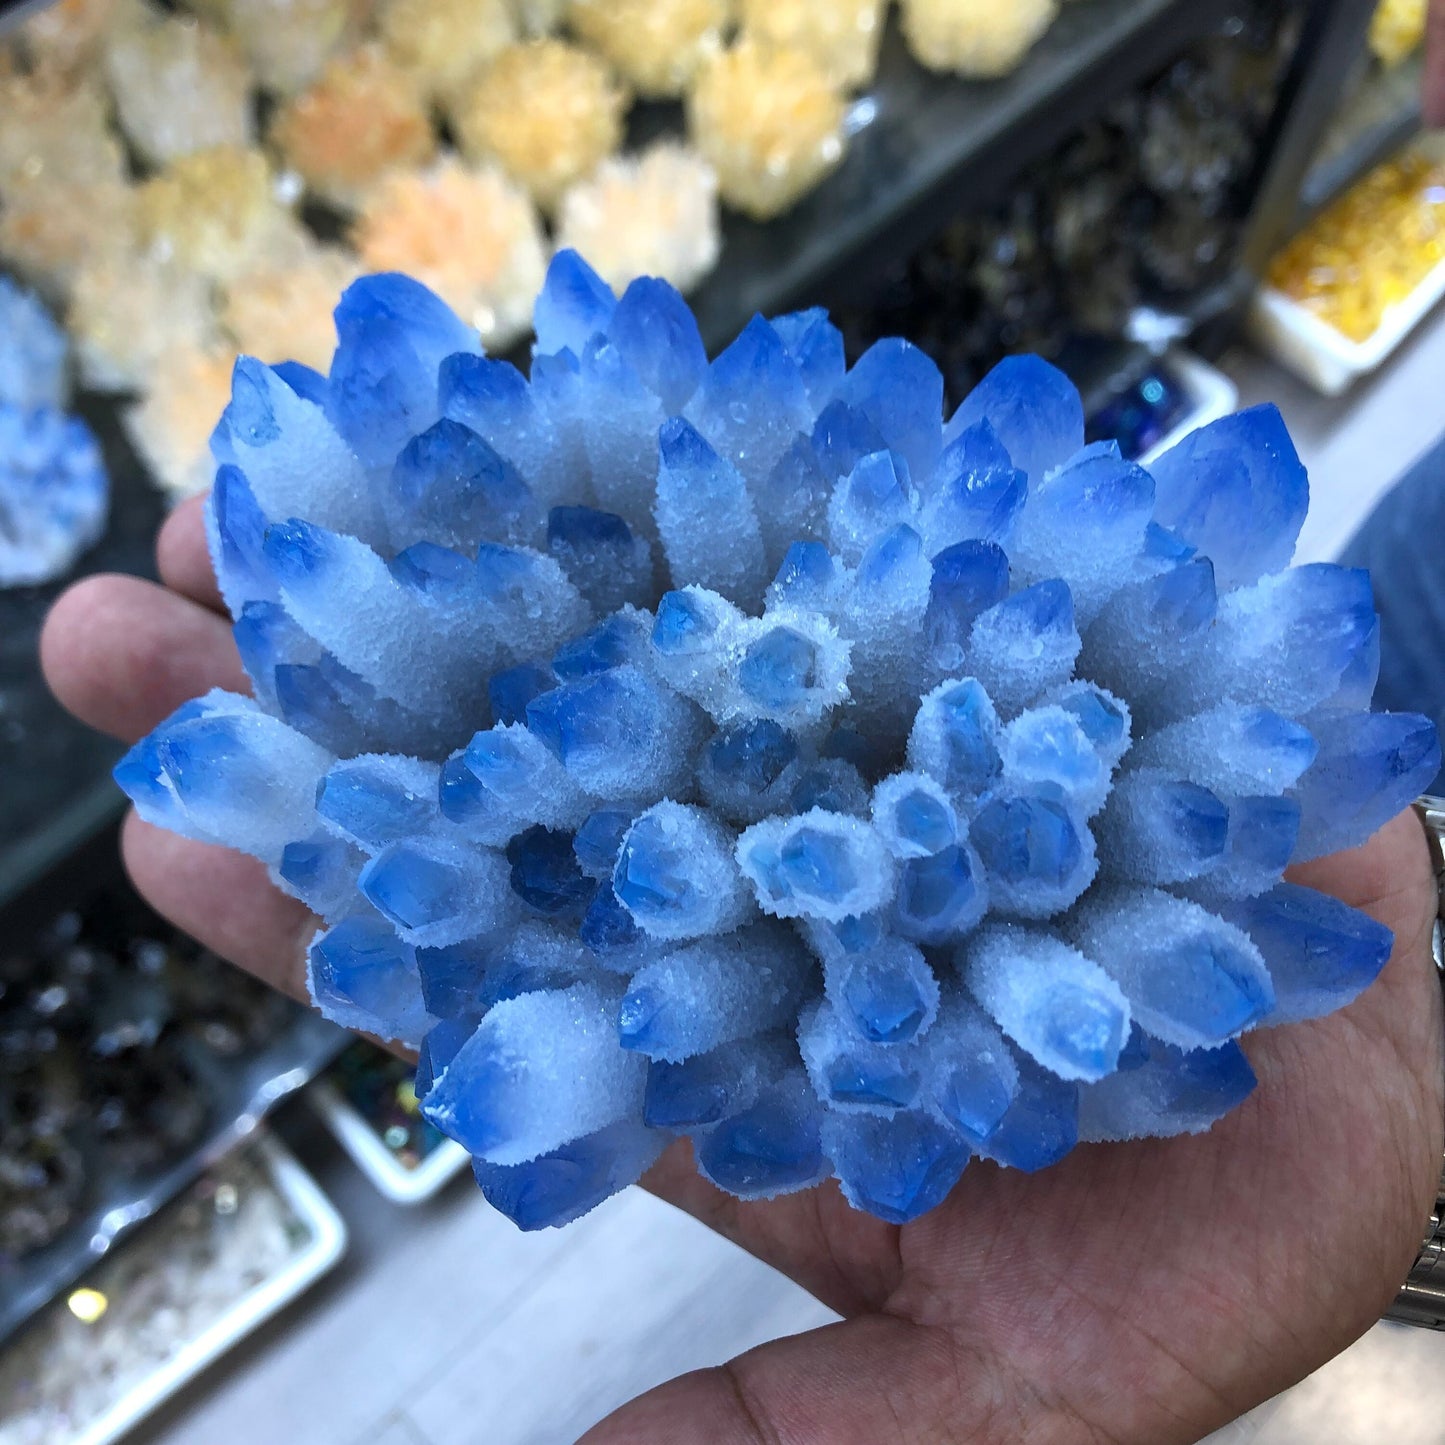 Rare Natural Blue Crystal Cluster Mineral Specimen - Perfect for Wedding Decoration, Reiki Healing and Home Decor